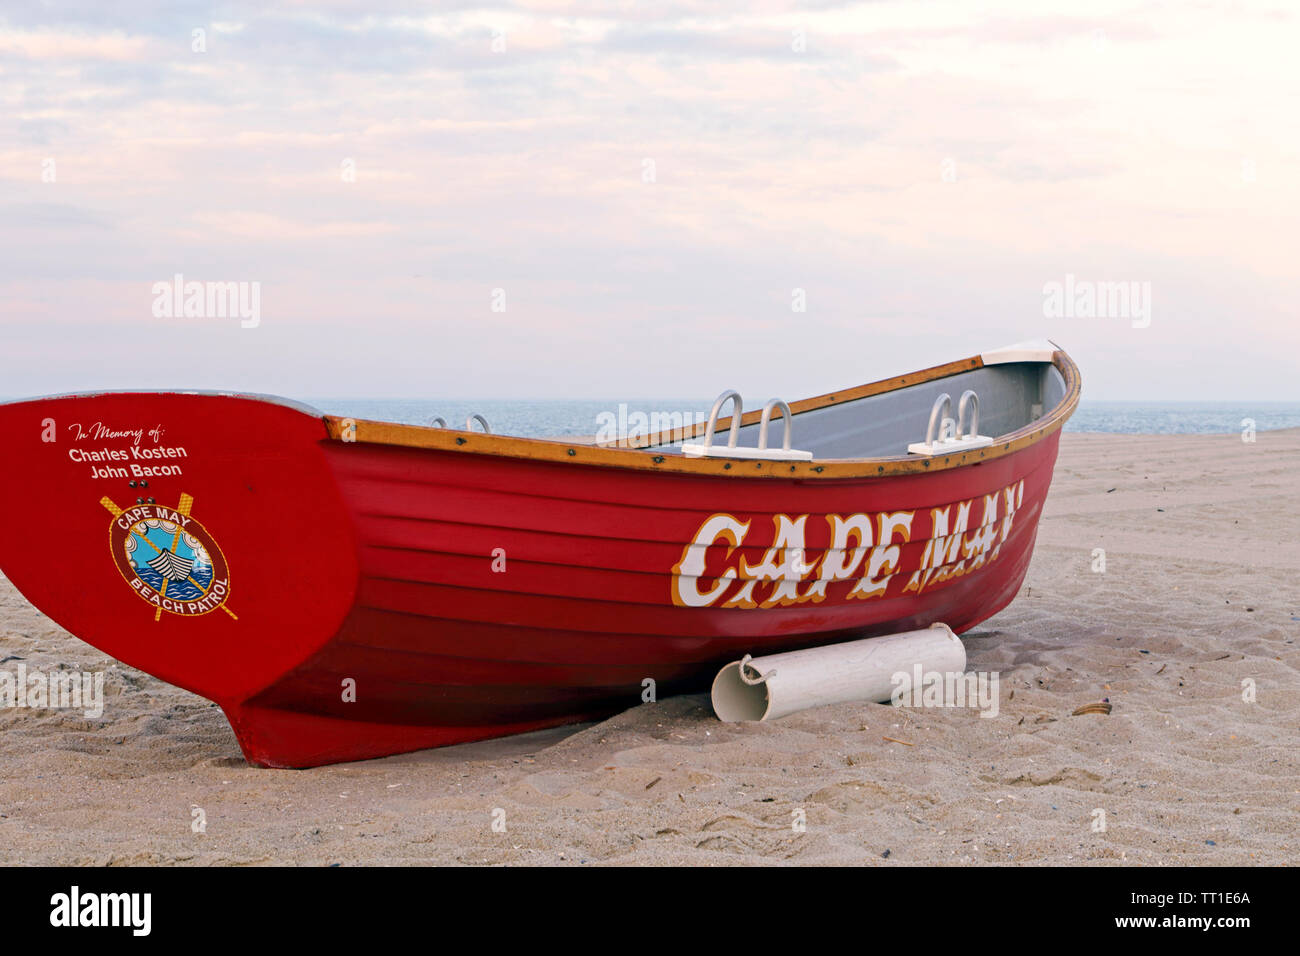 Eine rote Rettungsboot am Strand in Cape May, New Jersey, USA Stockfoto